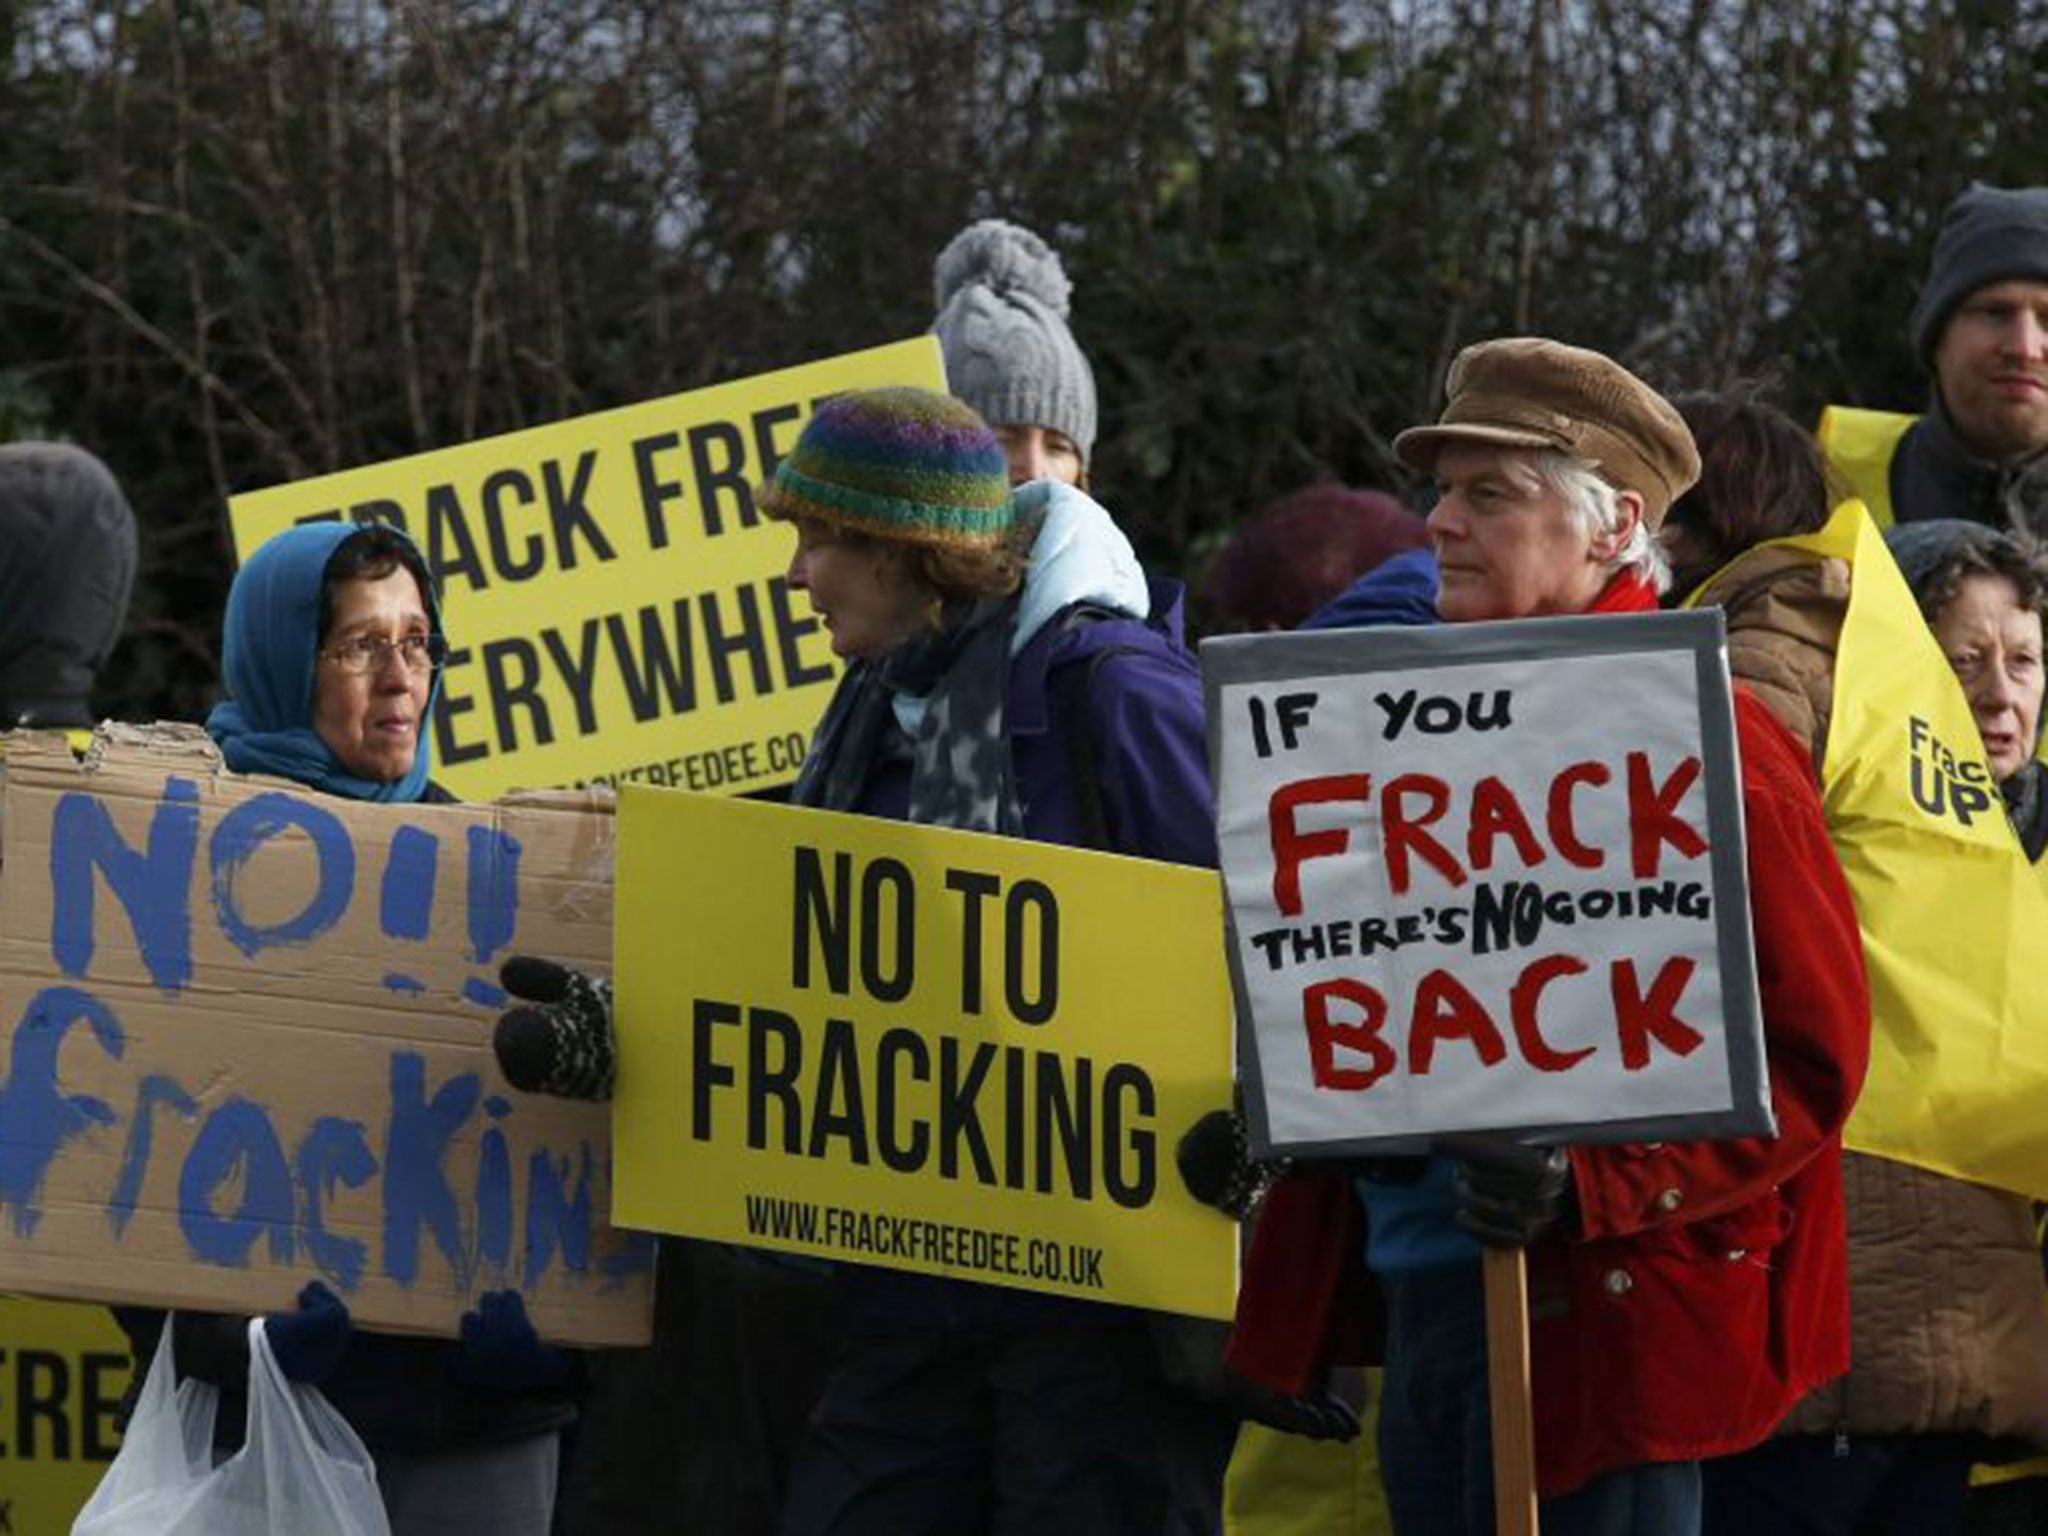 Fracking has attracted significant public opposition